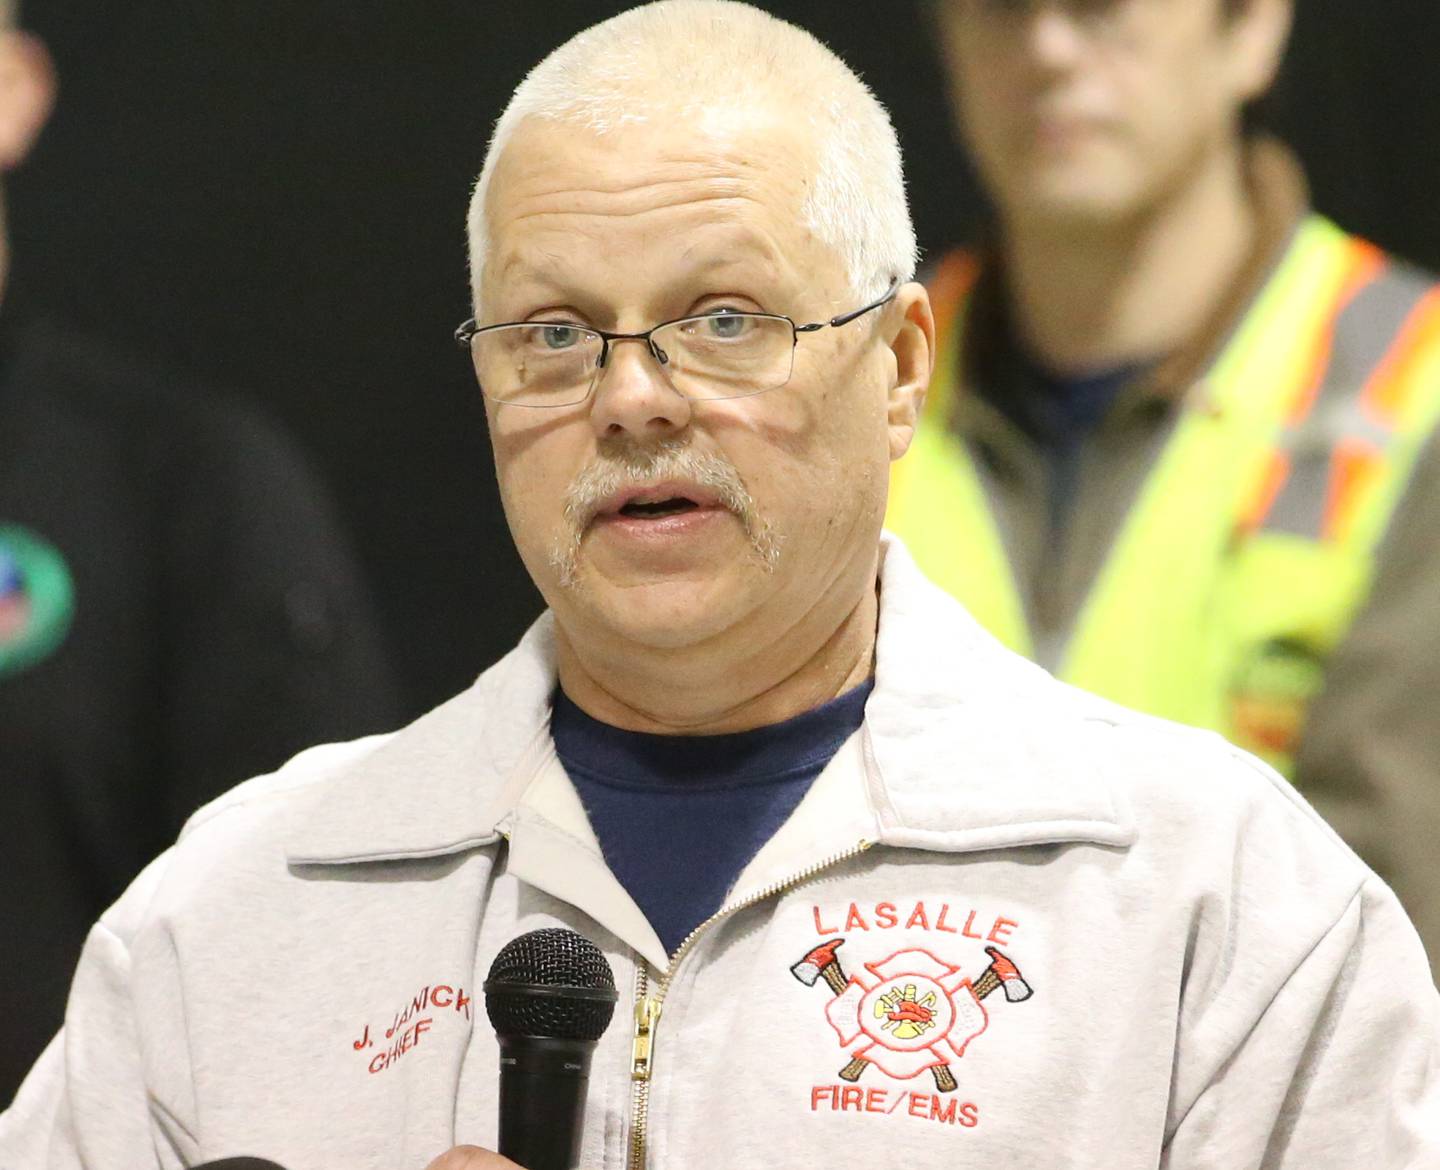 La Salle fire chief Jerry Janick, addresses the media at the Grove Center regarding the Carus Chemical fire on Thursday, Jan. 12, 2023 in La Salle.